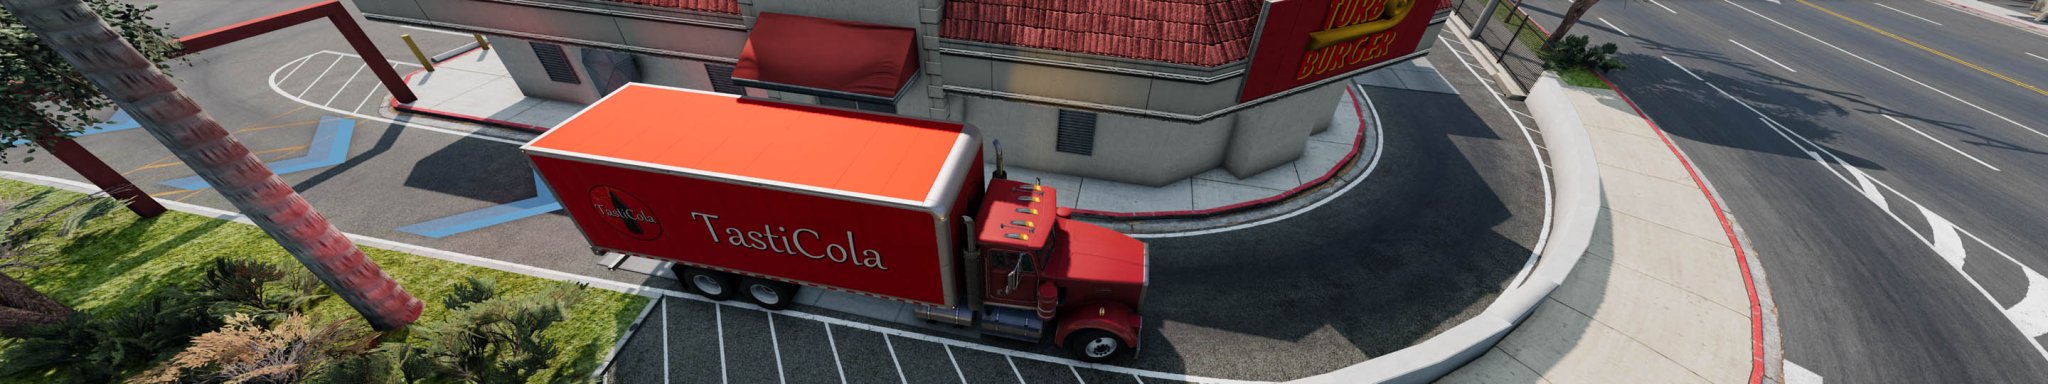 3 BeamNG Career Mode TURBO BURGER TRUCK Delivery copy.jpg